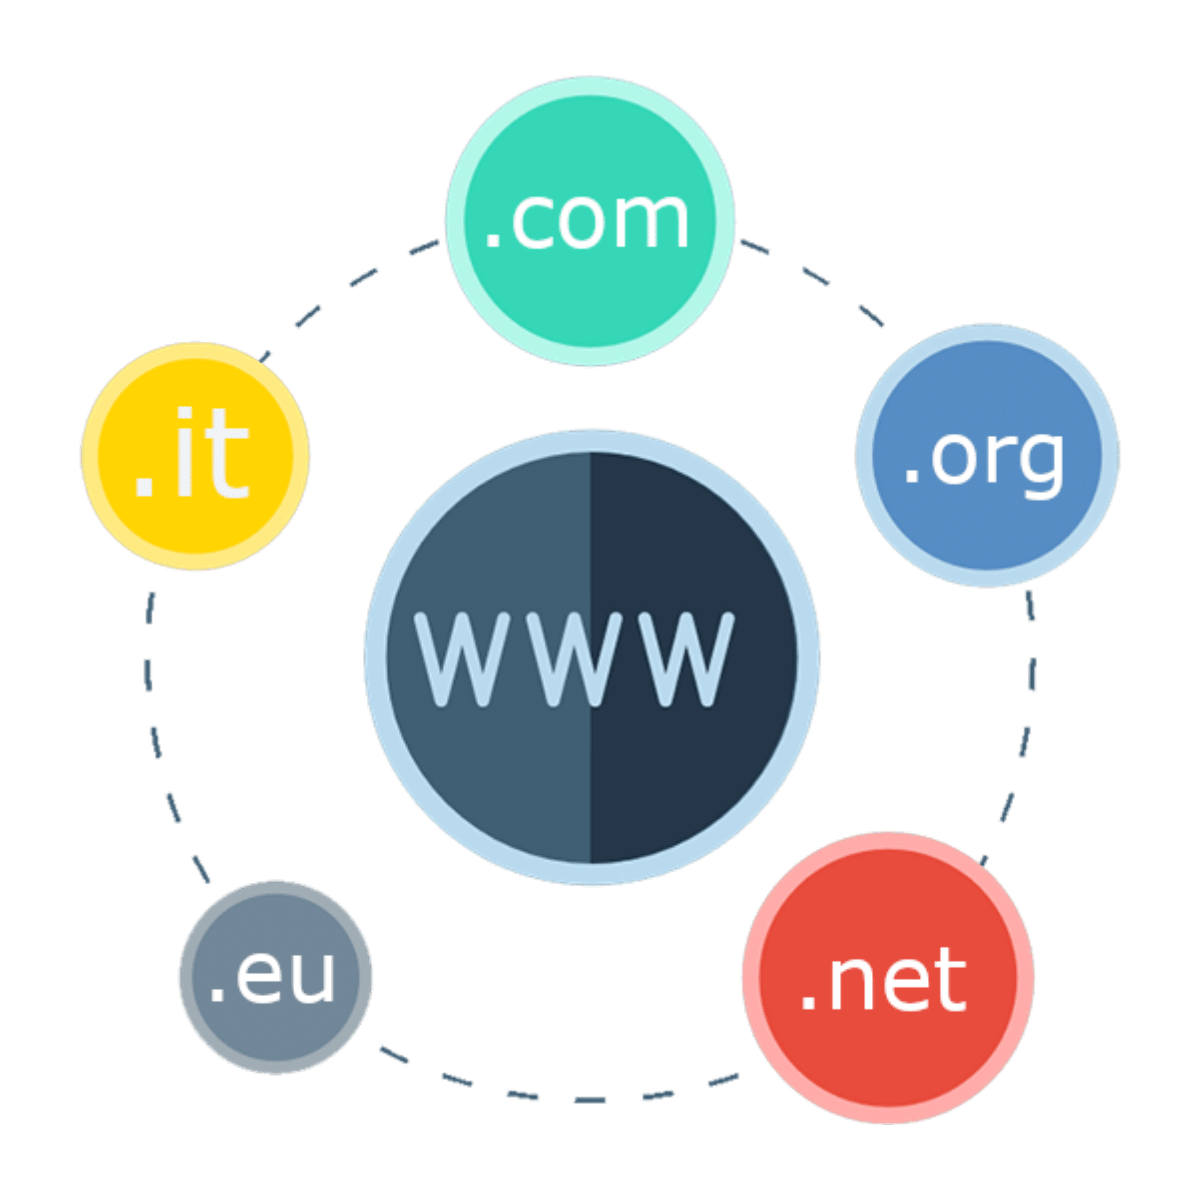 Register and transfer domains